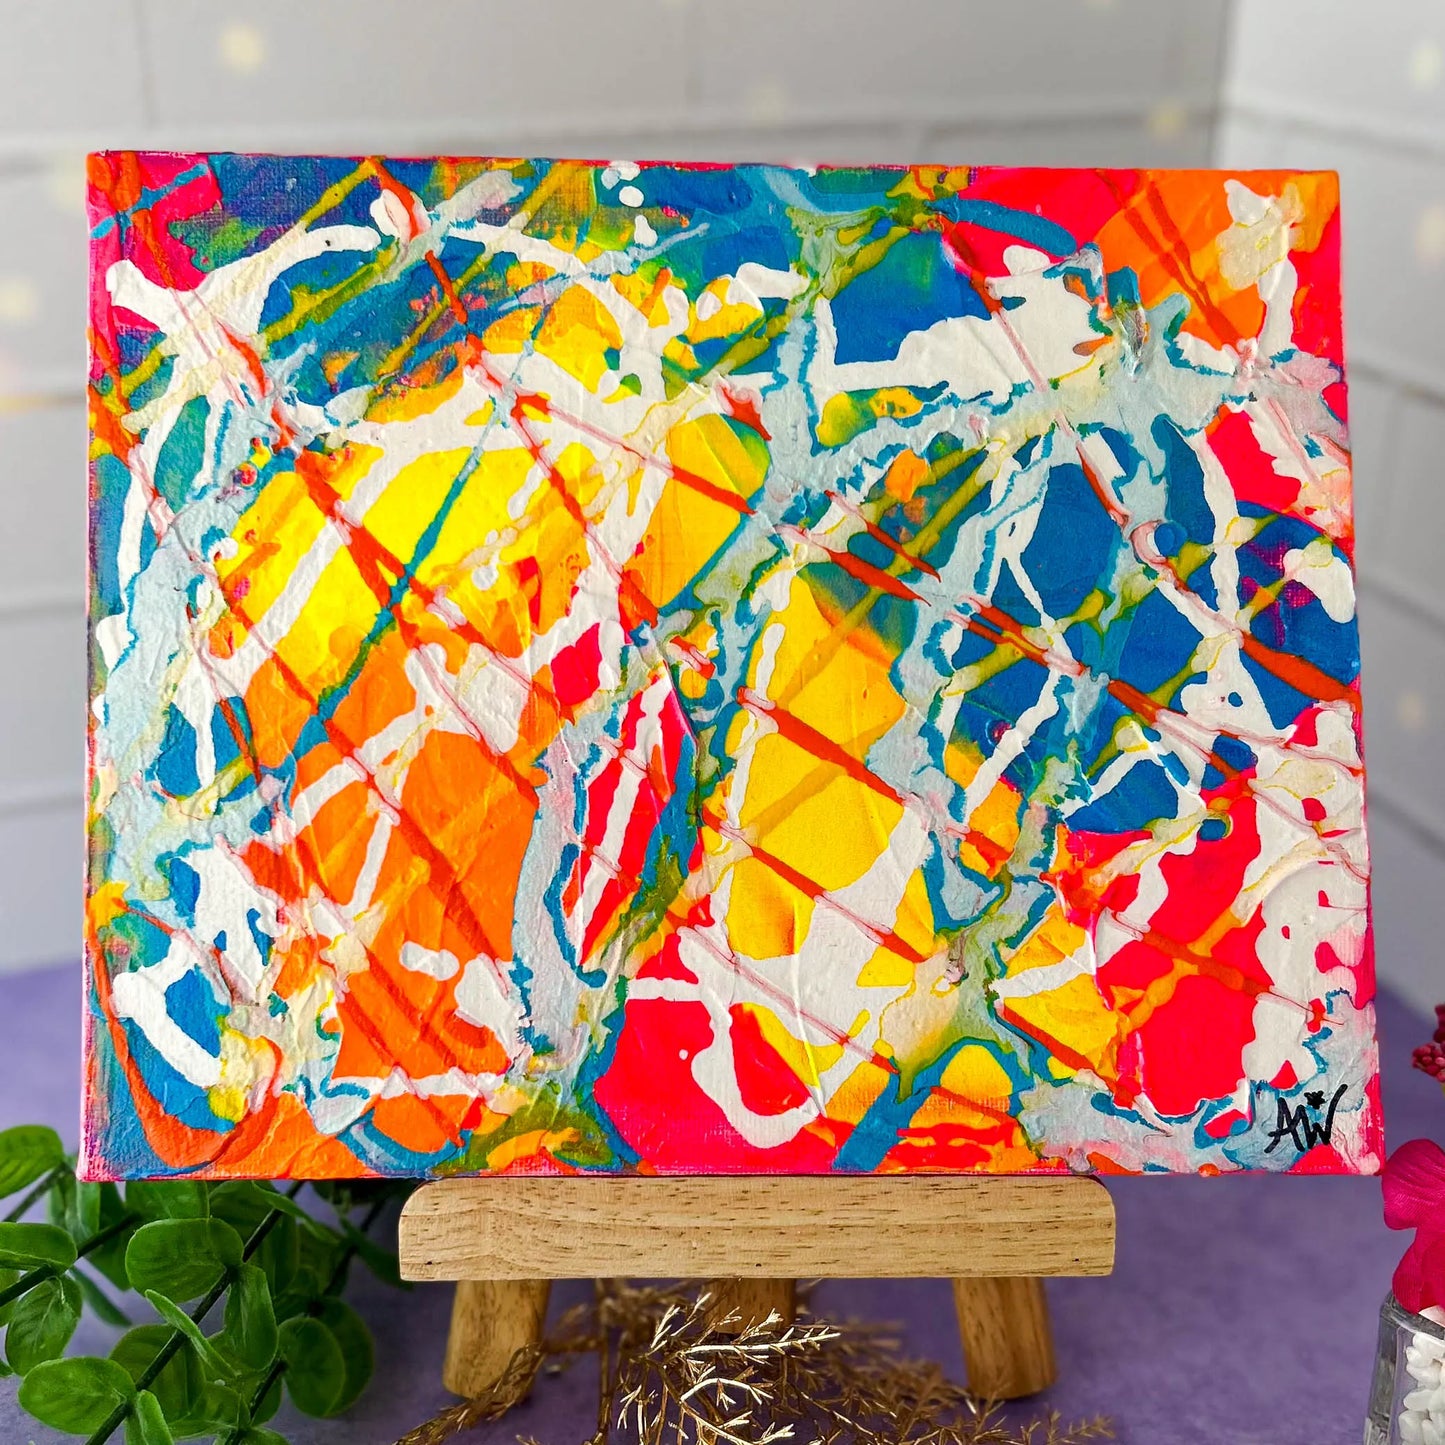 Neon Commotion 8x10 Abstract Painting